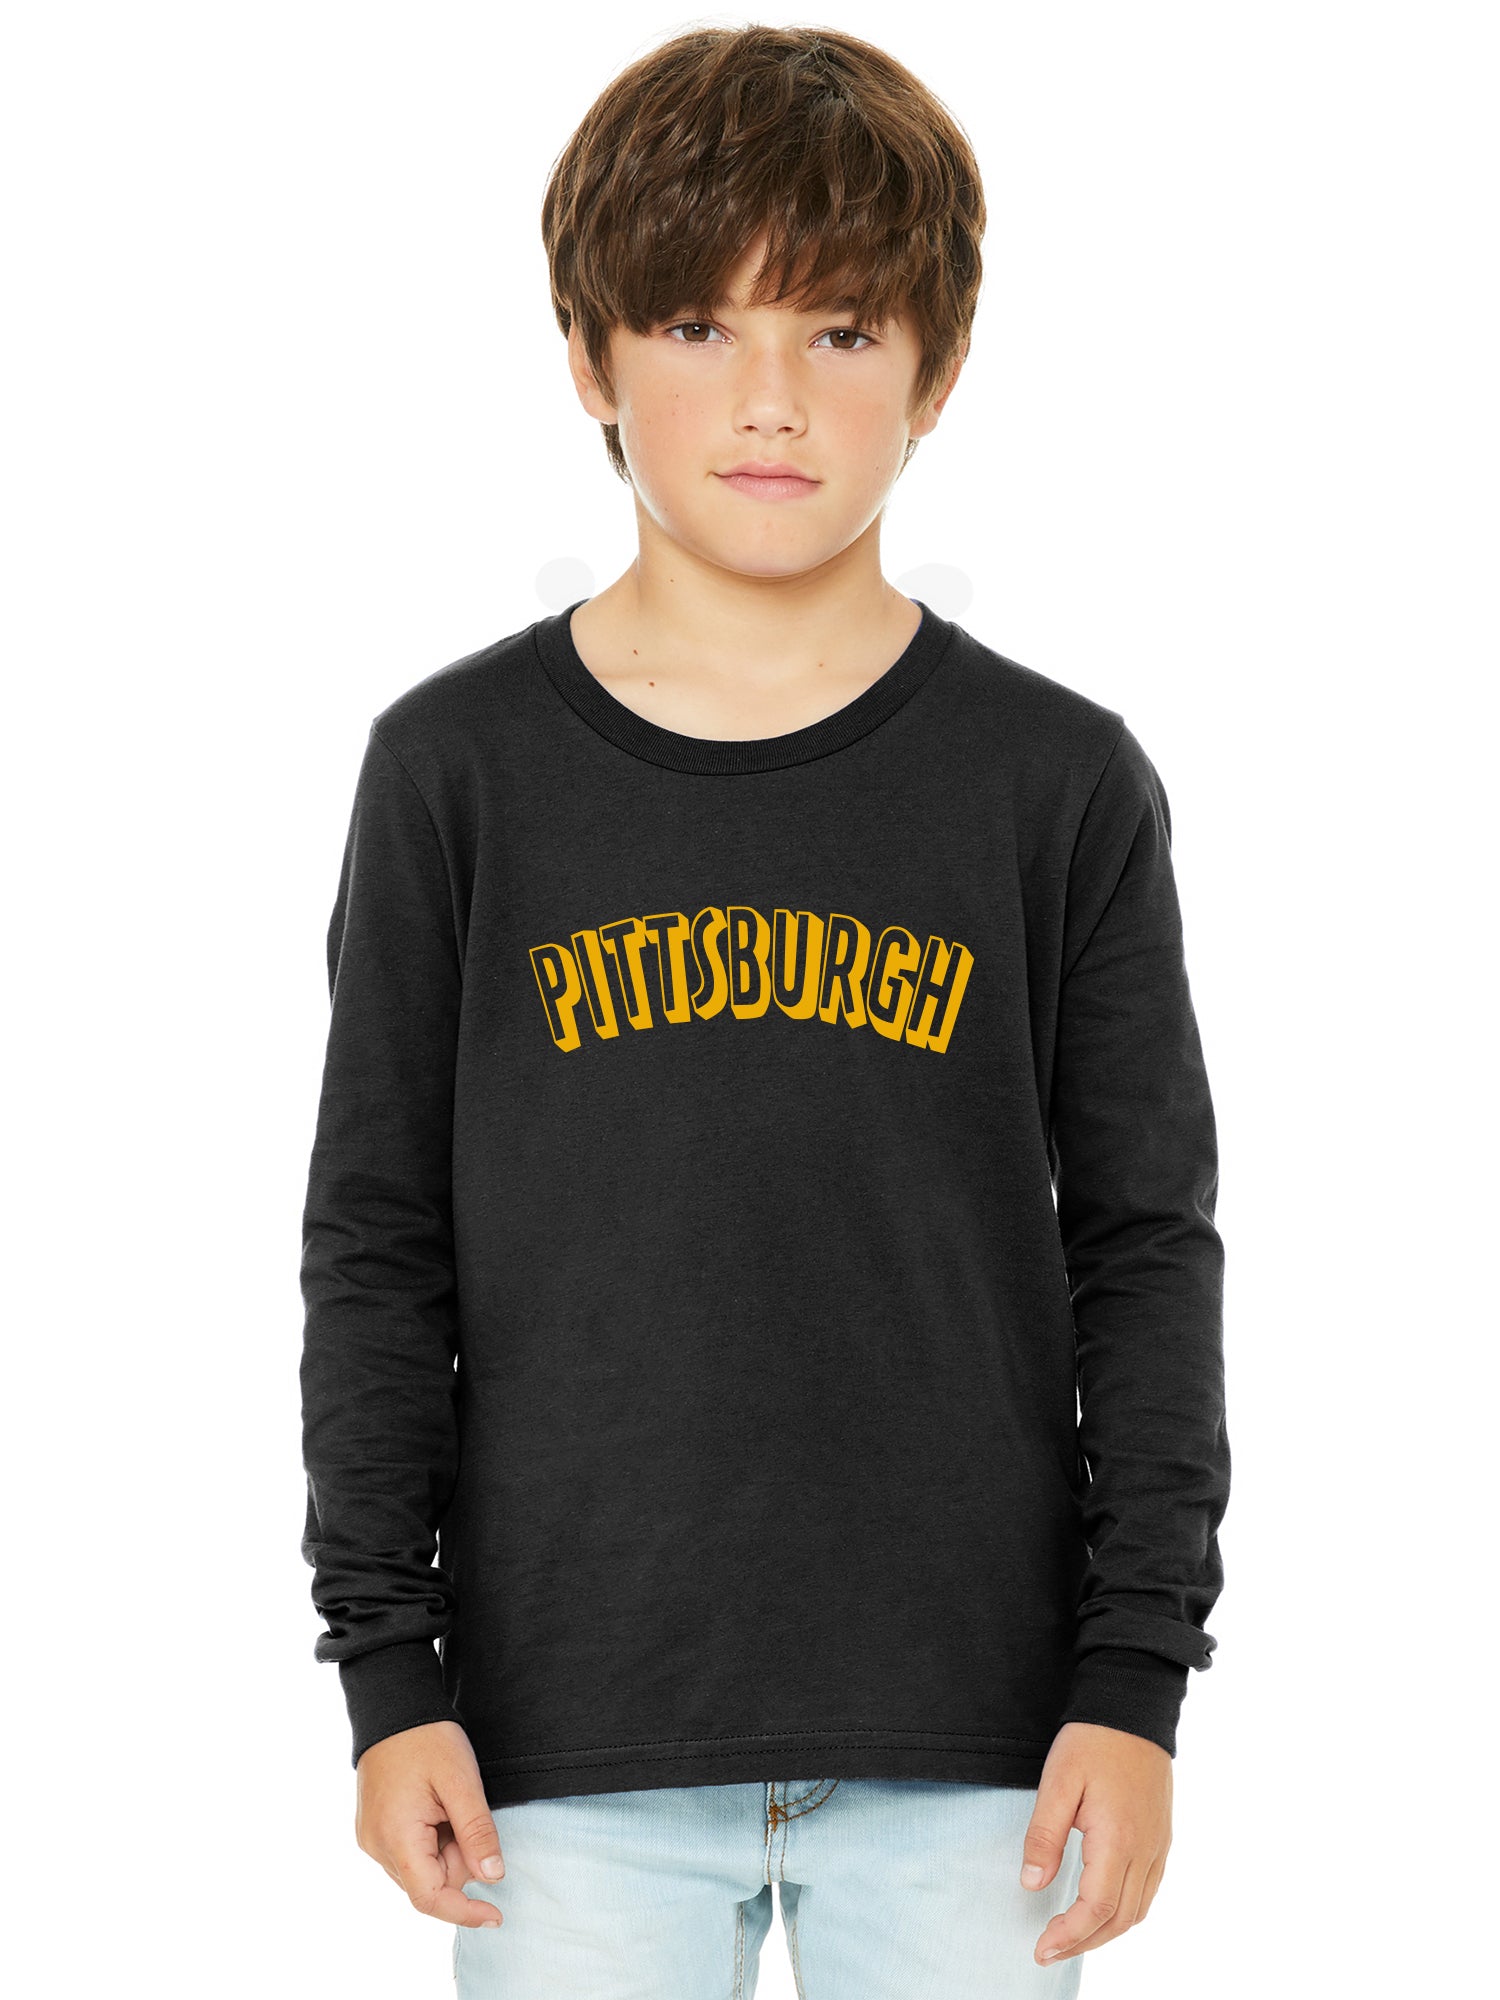 Pittsburgh Clothing